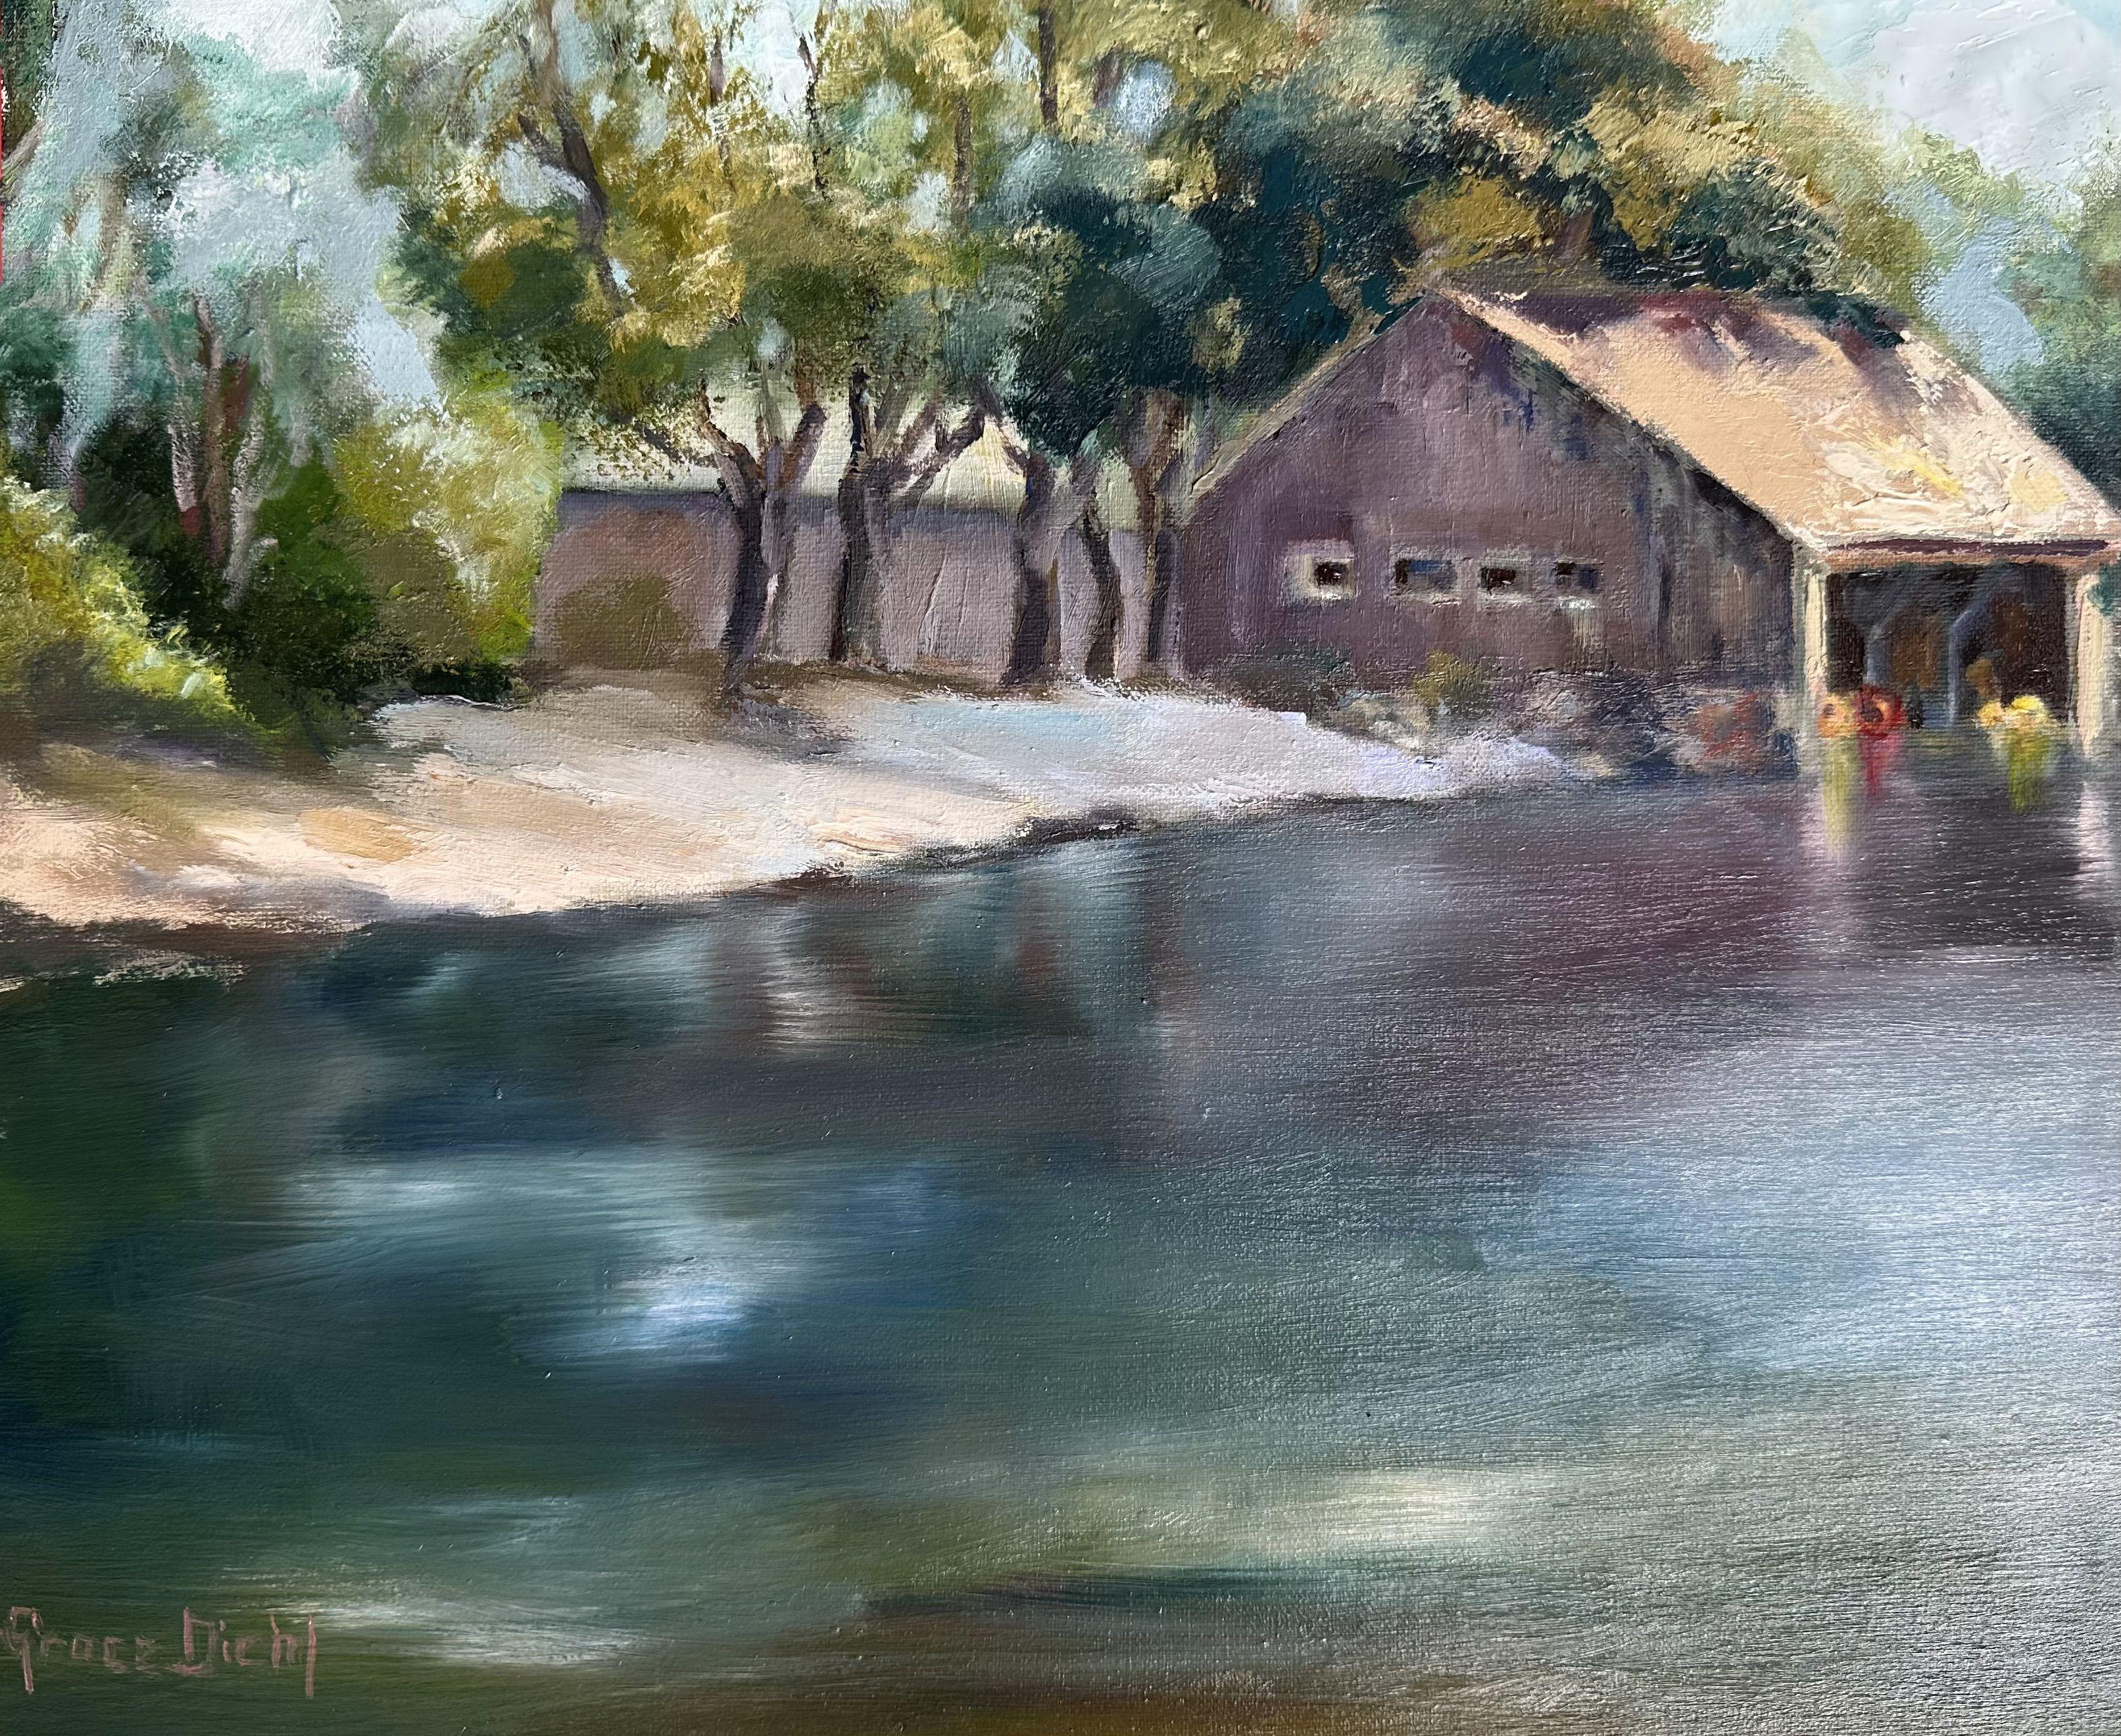 This is a painting I've done to depict the experience the serenity of nature at Irvine Regional Park's Boathouse. I wanted to the capture the tranquility of painting on that day en plein air of the Historic boathouse and the colorful aqua boats